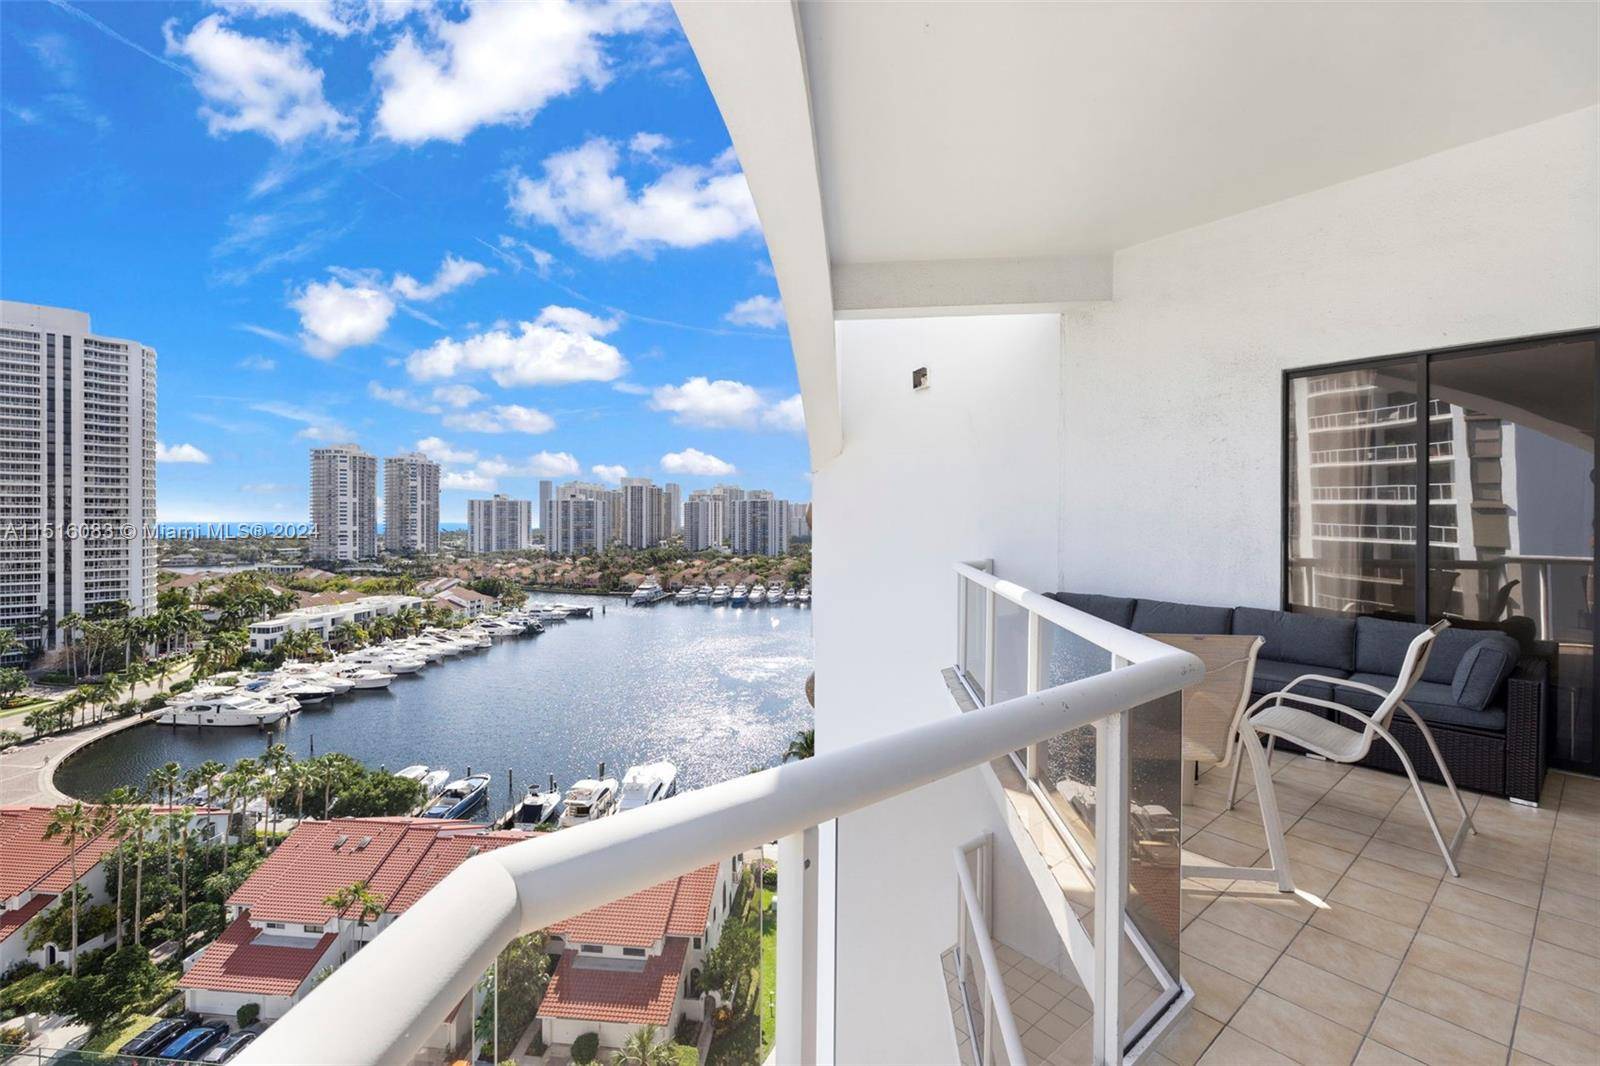 Penthouse 04 is a split floor plan 2 bed 2 bath with great views of the intercostal and partial ocean.